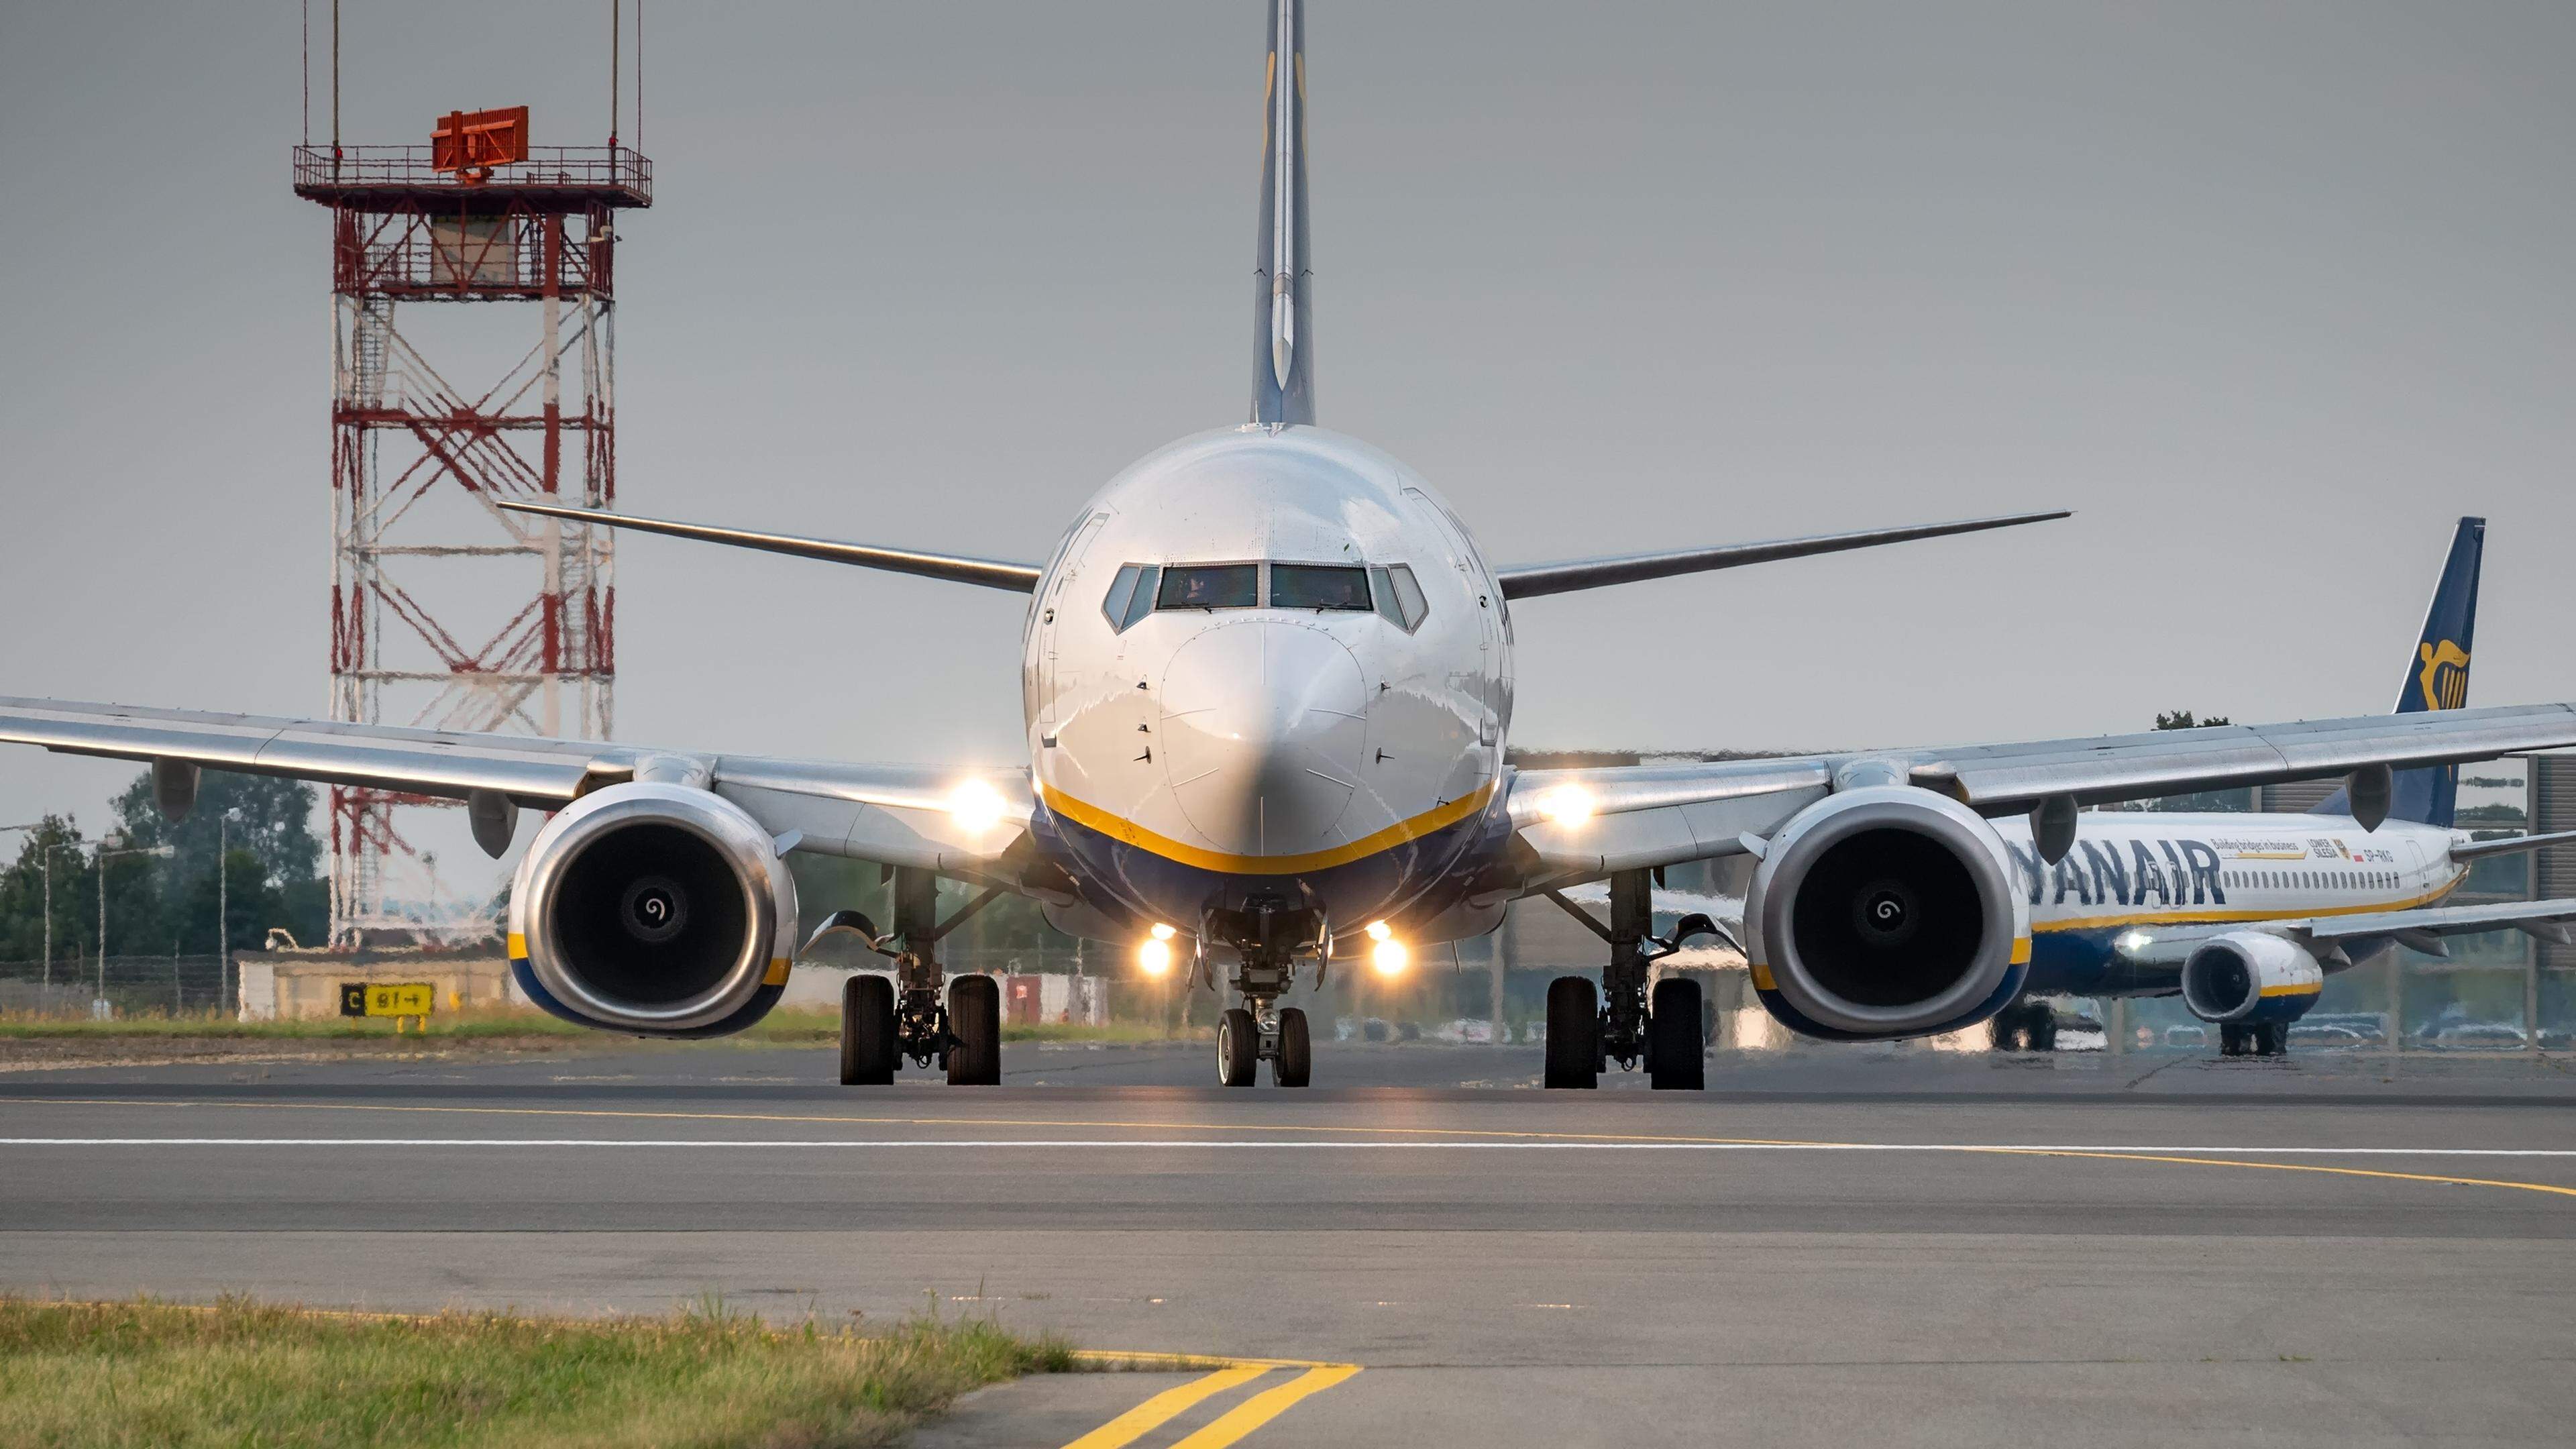 A backlog of orders is driving up leasing rates for planes, especially workhorses like the Boeing 737 (pictured) and the Airbus A321, says an ING report on the global aviation industry